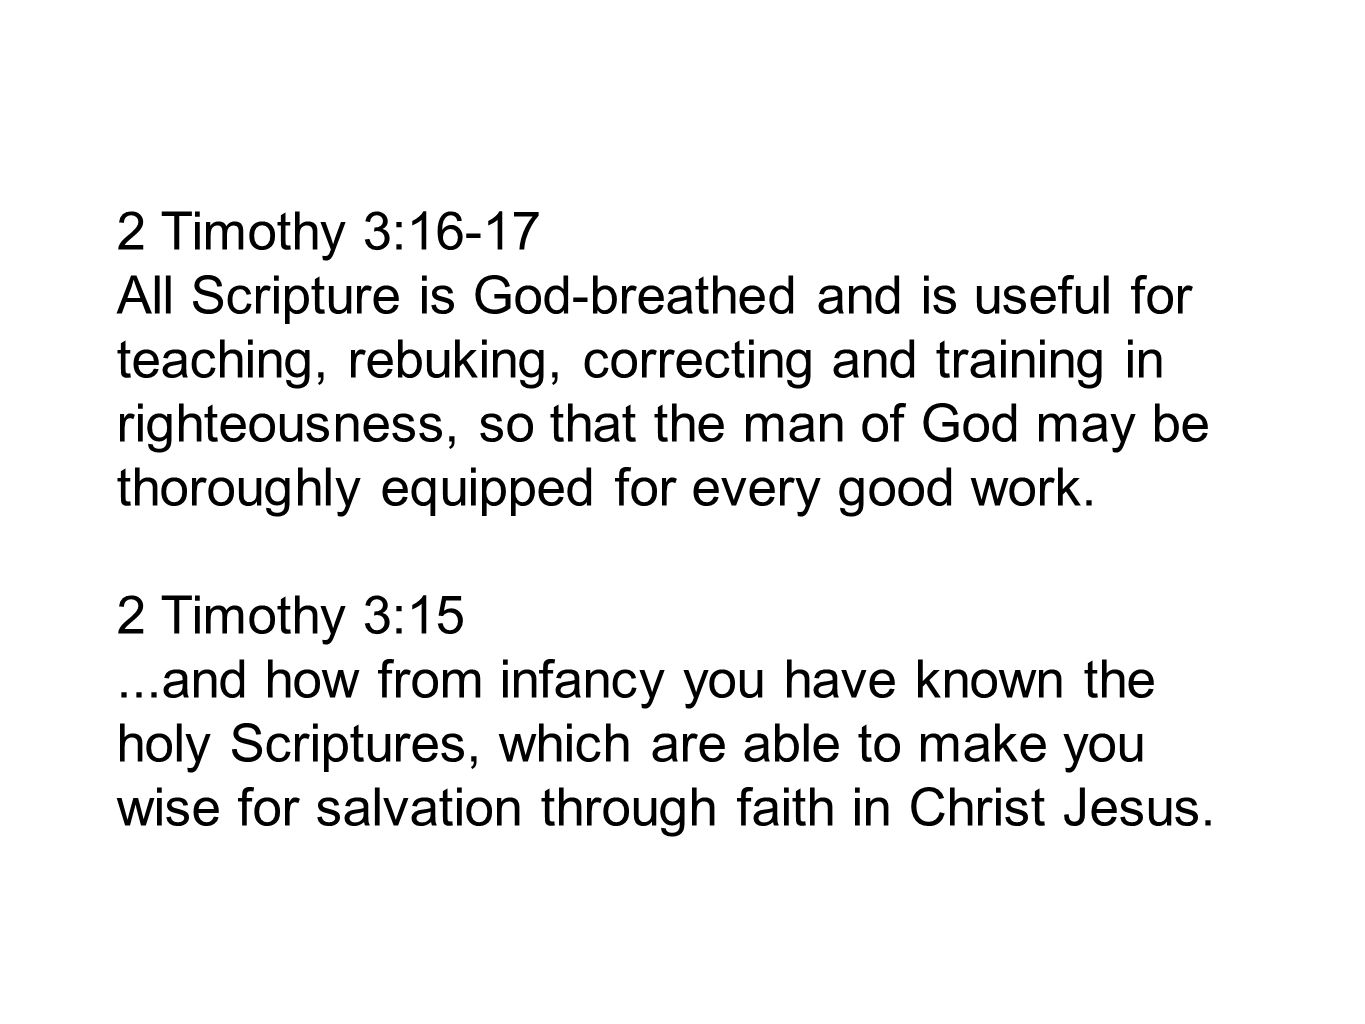 2 Timothy 3:16-17 All Scripture is God-breathed and is useful for teaching, rebuking, correcting and training in righteousness, so that the man of God may be thoroughly equipped for every good work.